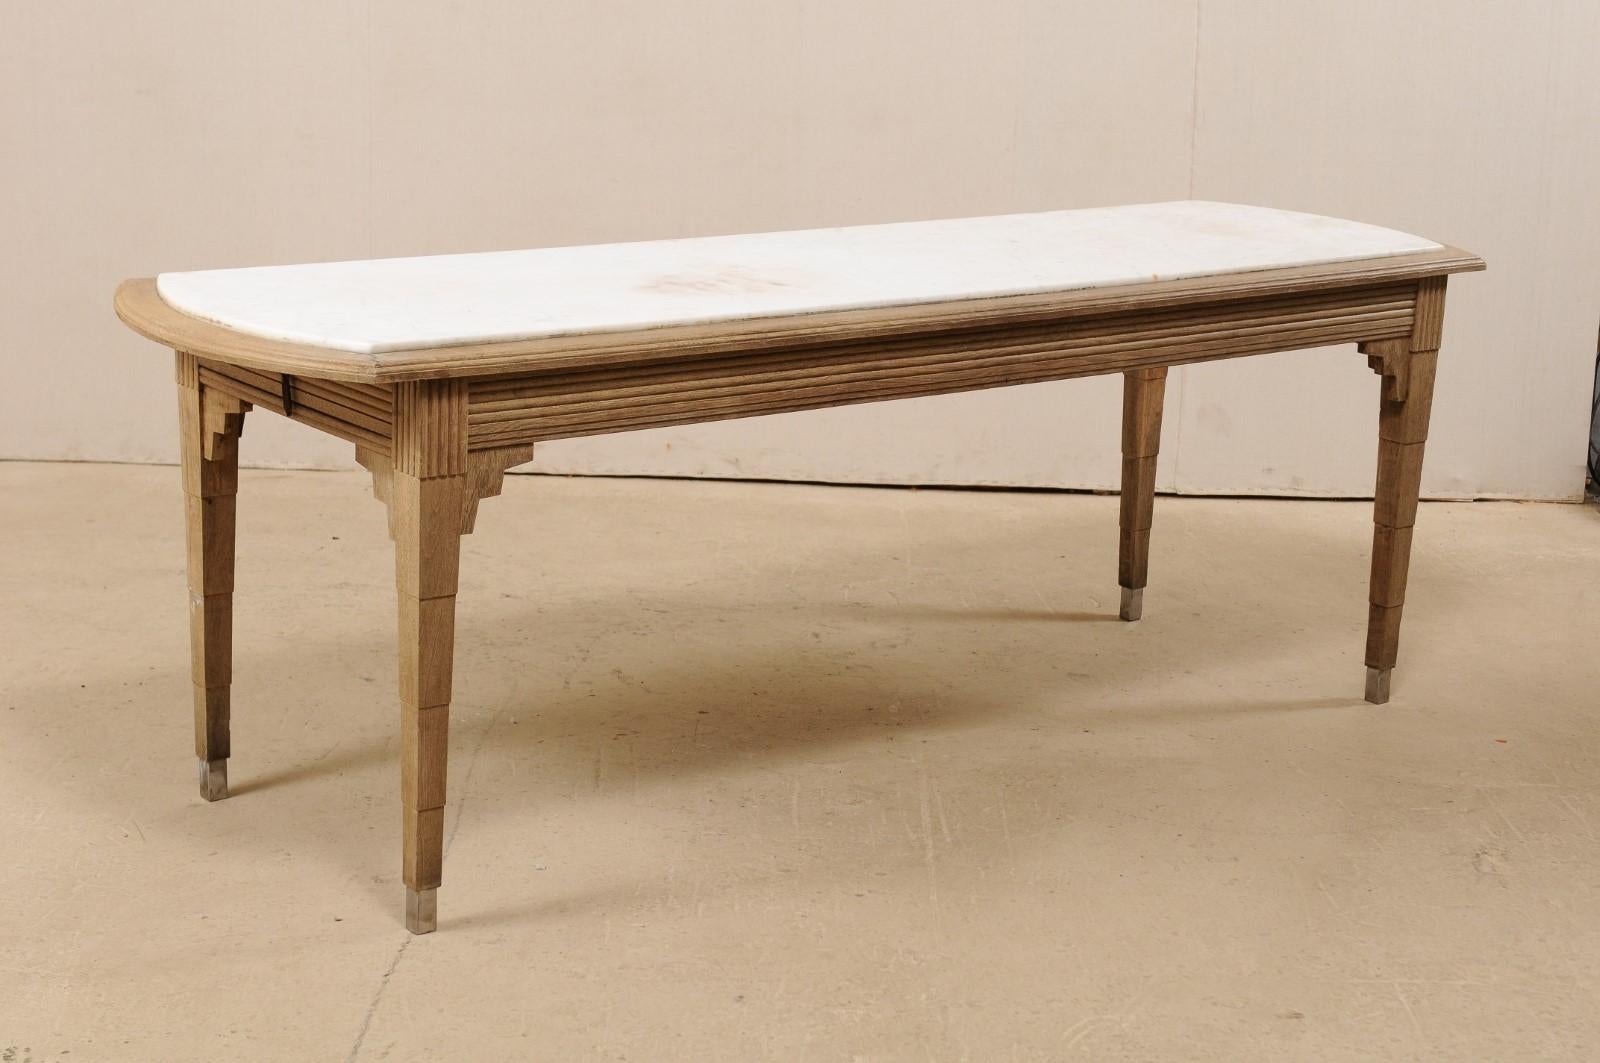 A French slender-sized table with marble top, perfect for a kitchen island, circa 1930s. This antique Art Deco table from France features an elongated rectangular-shaped top, with arched ends, set with white marble. A single drawer is housed at